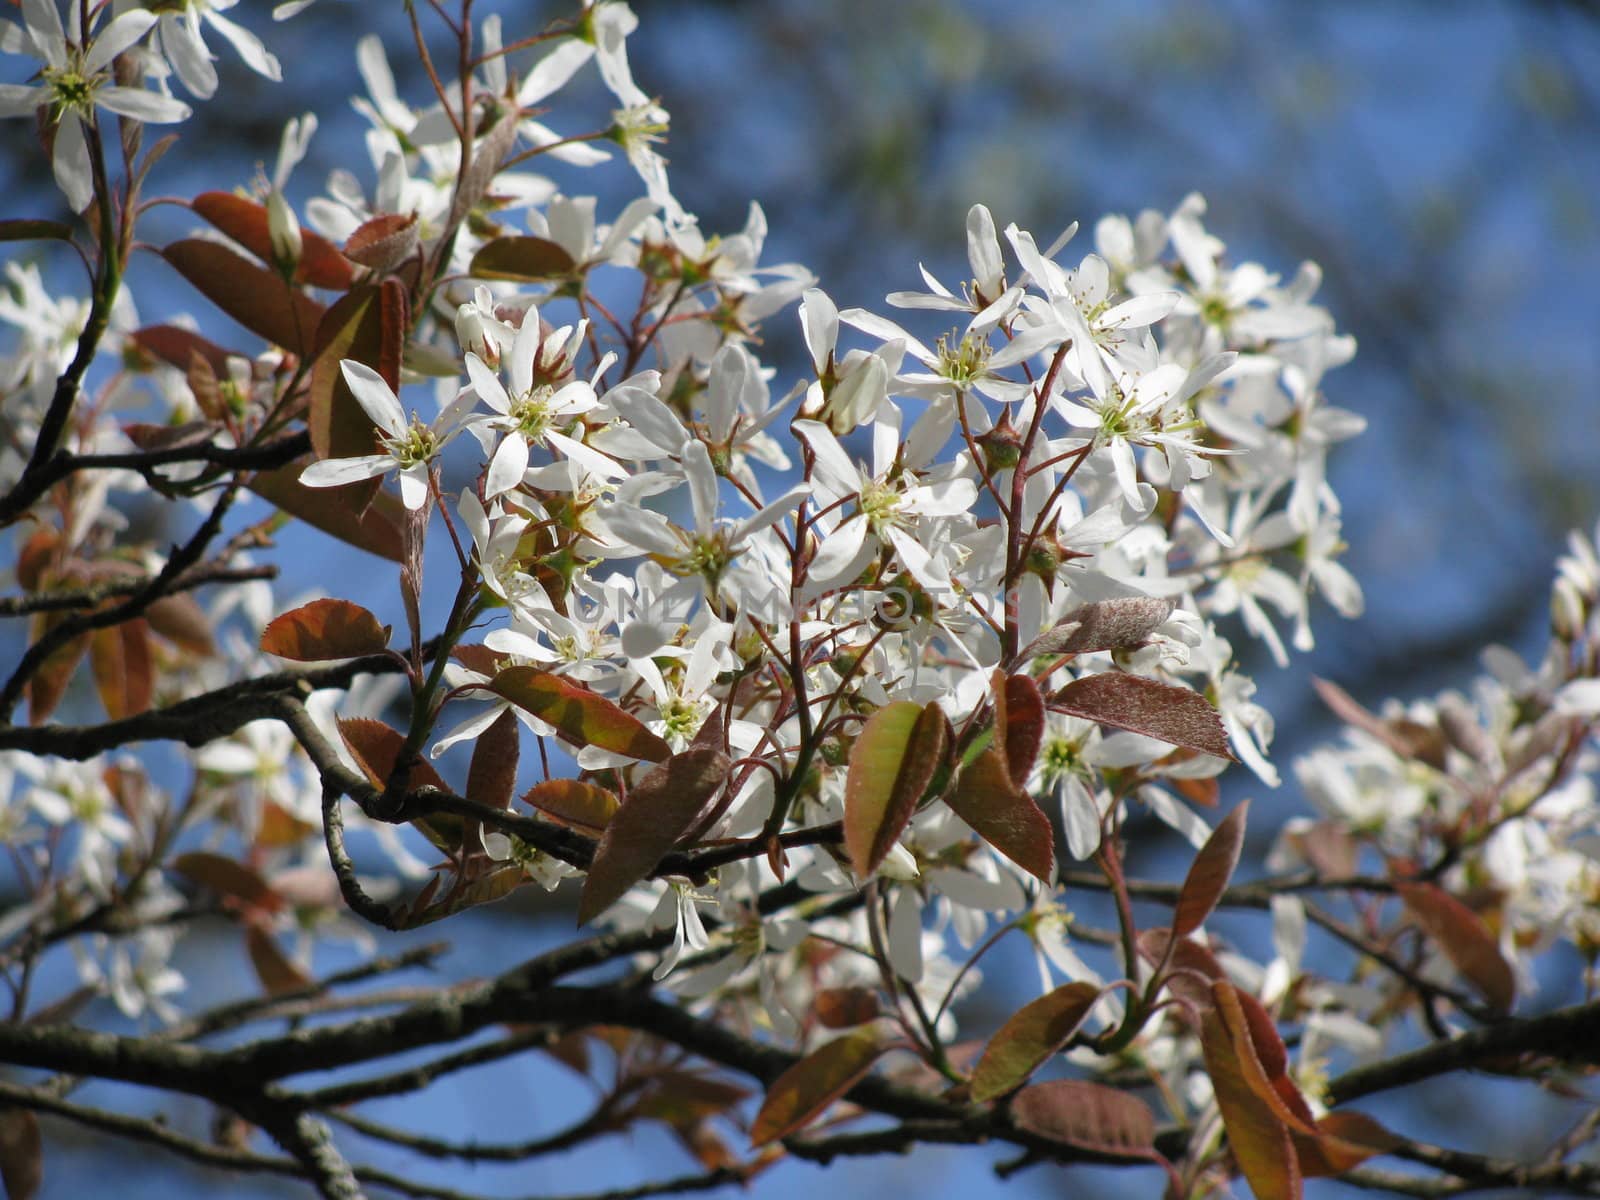 blackthorn in the spring, blossoms on the bush